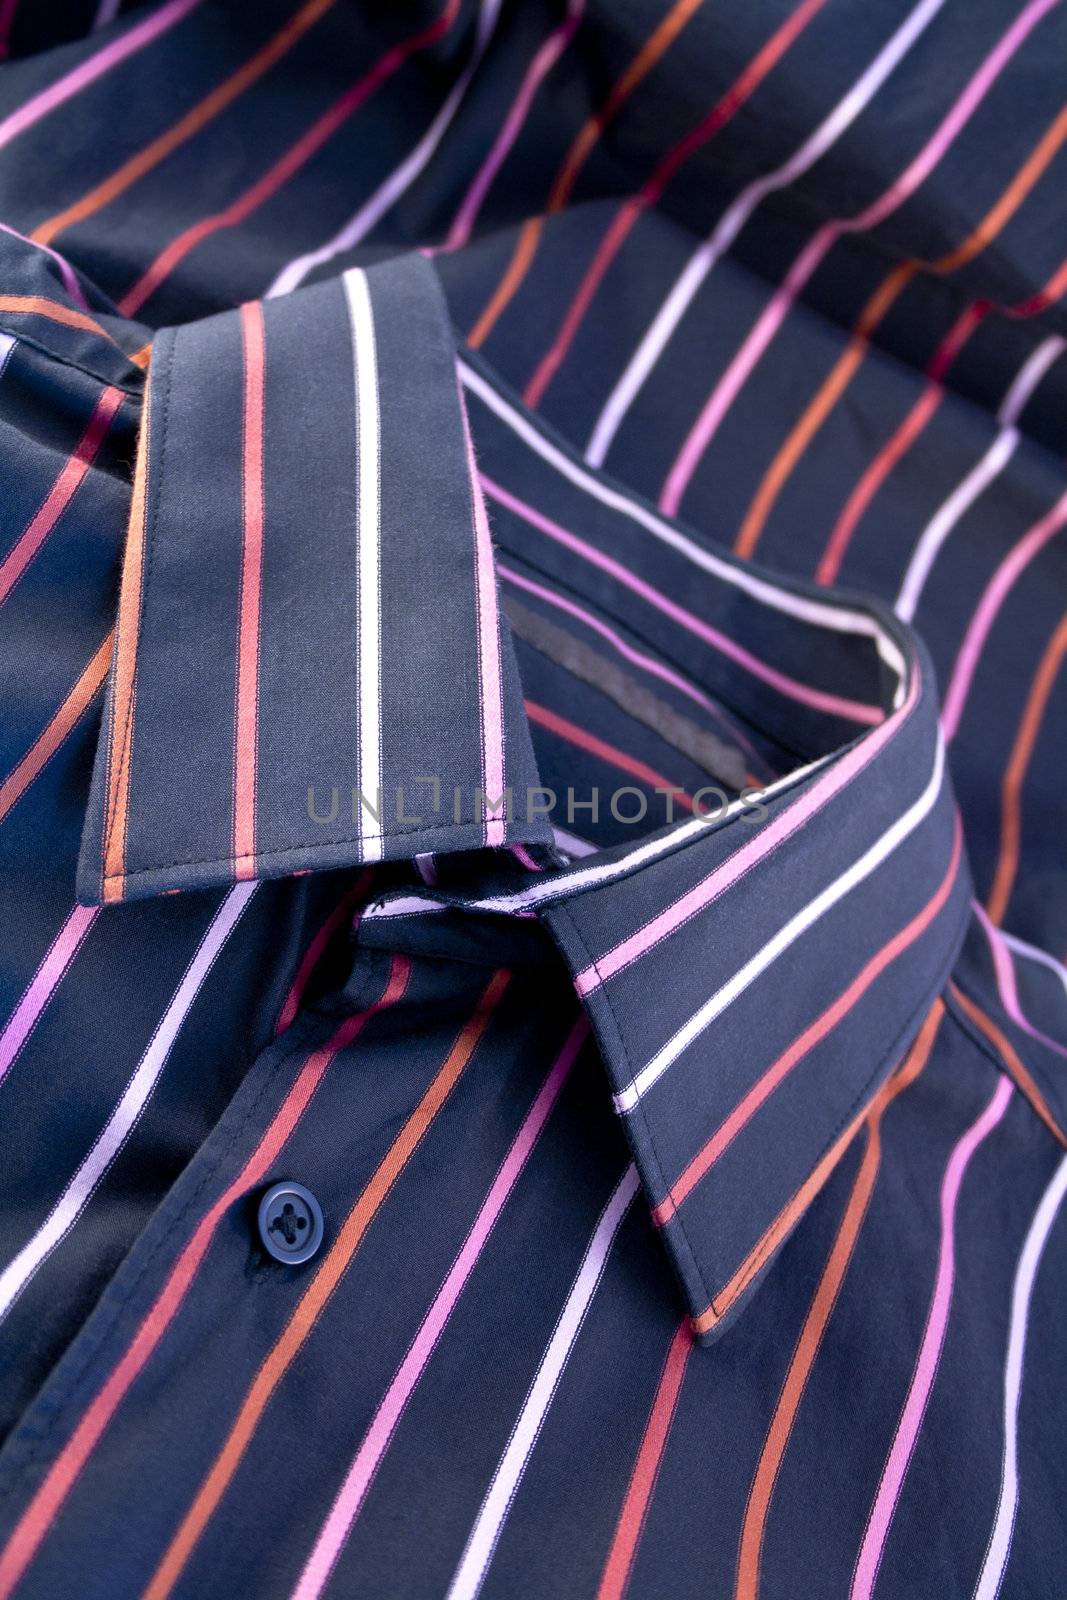 Details of the male black shirt with colorful lines